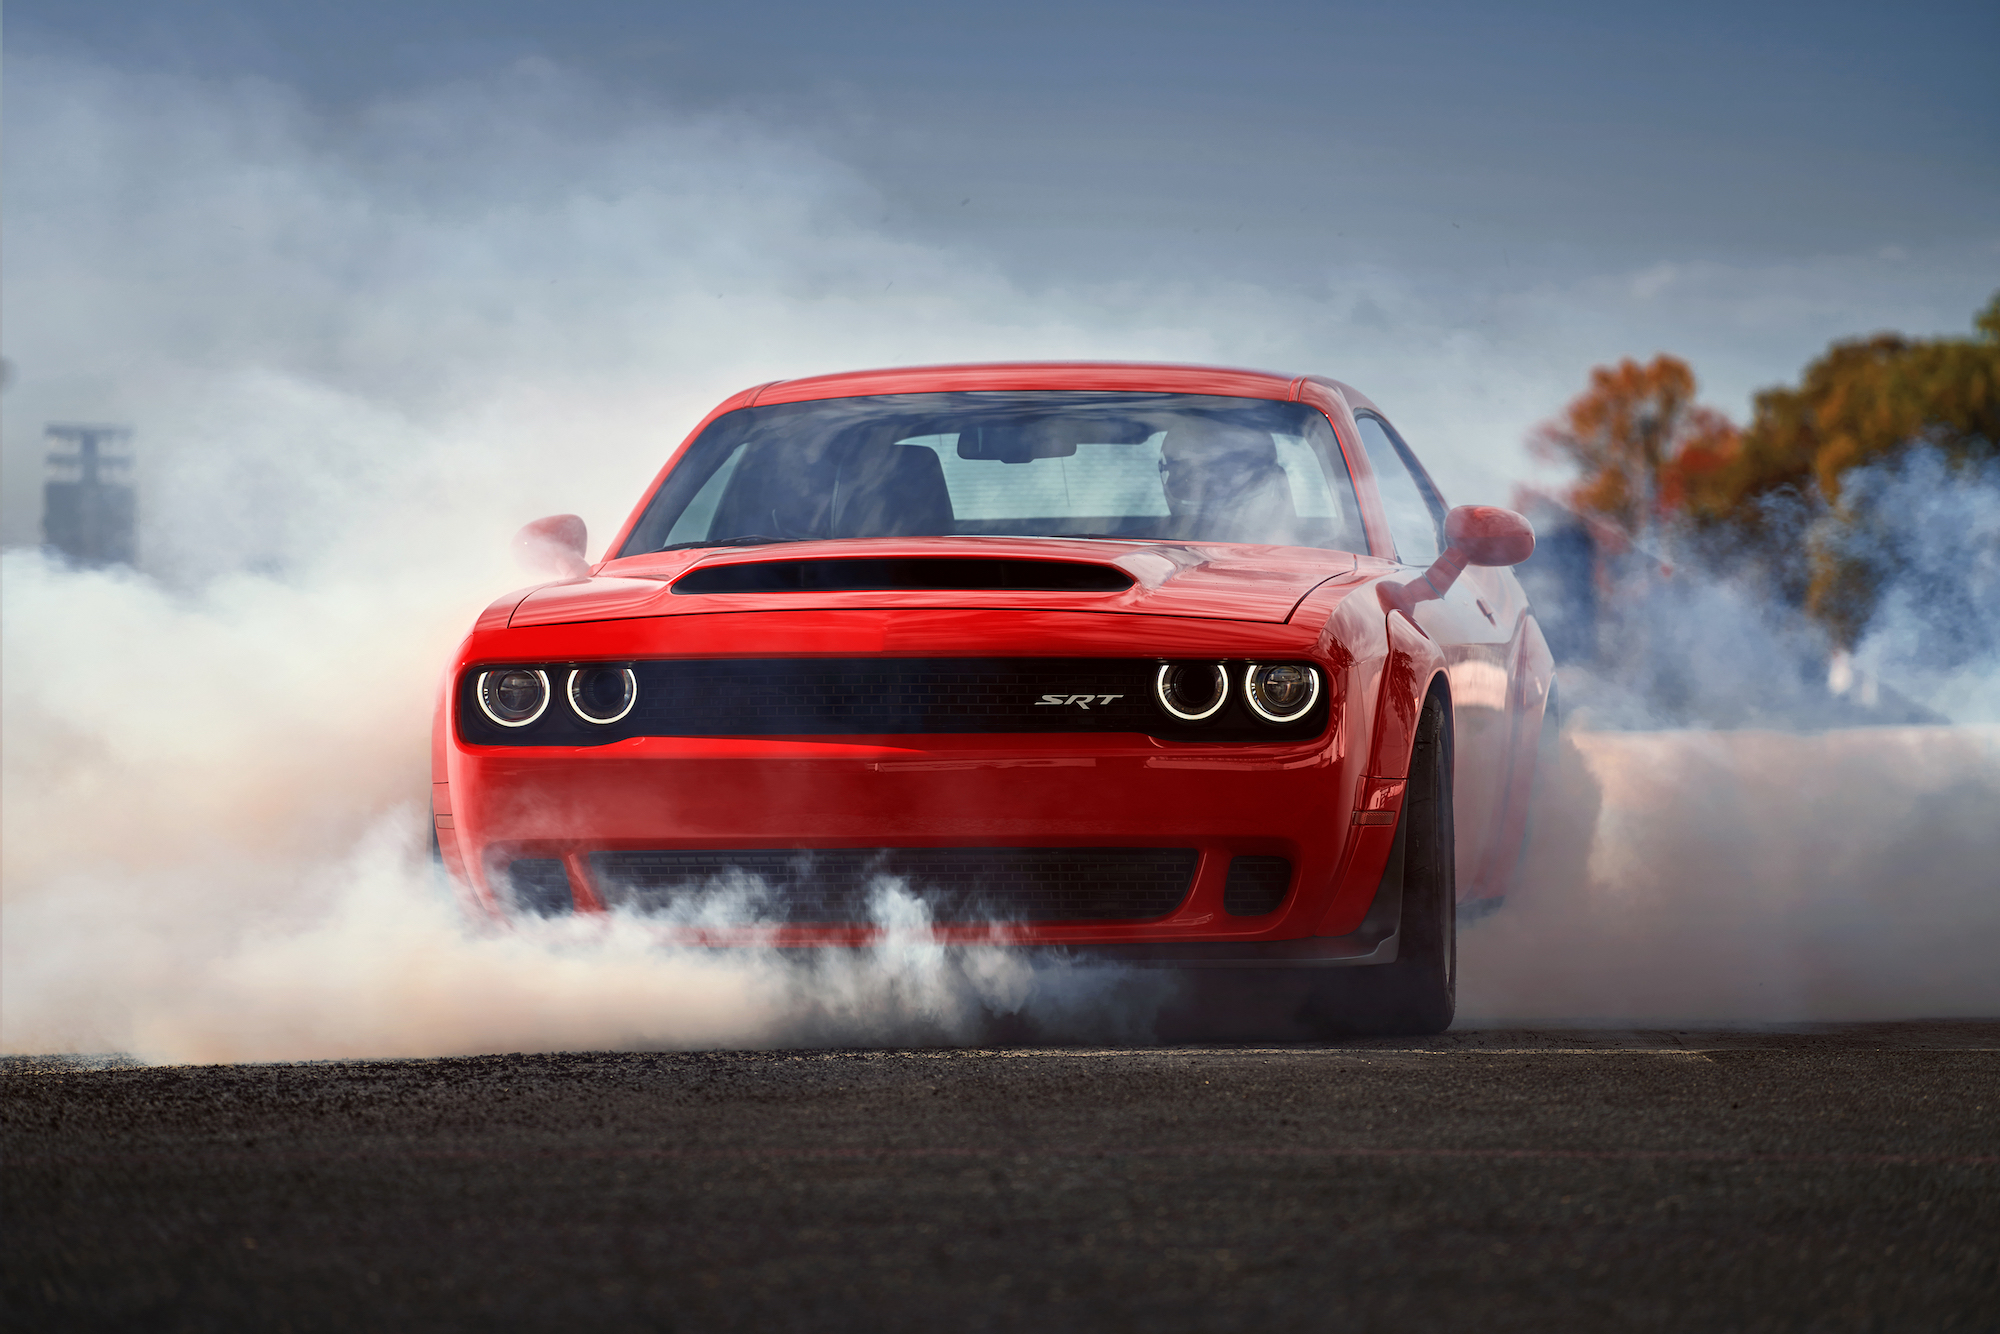 A red 2018 Dodge Challenger SRT Demon doing a burnout. The Demon is among the top fastest muscle cars of all time.